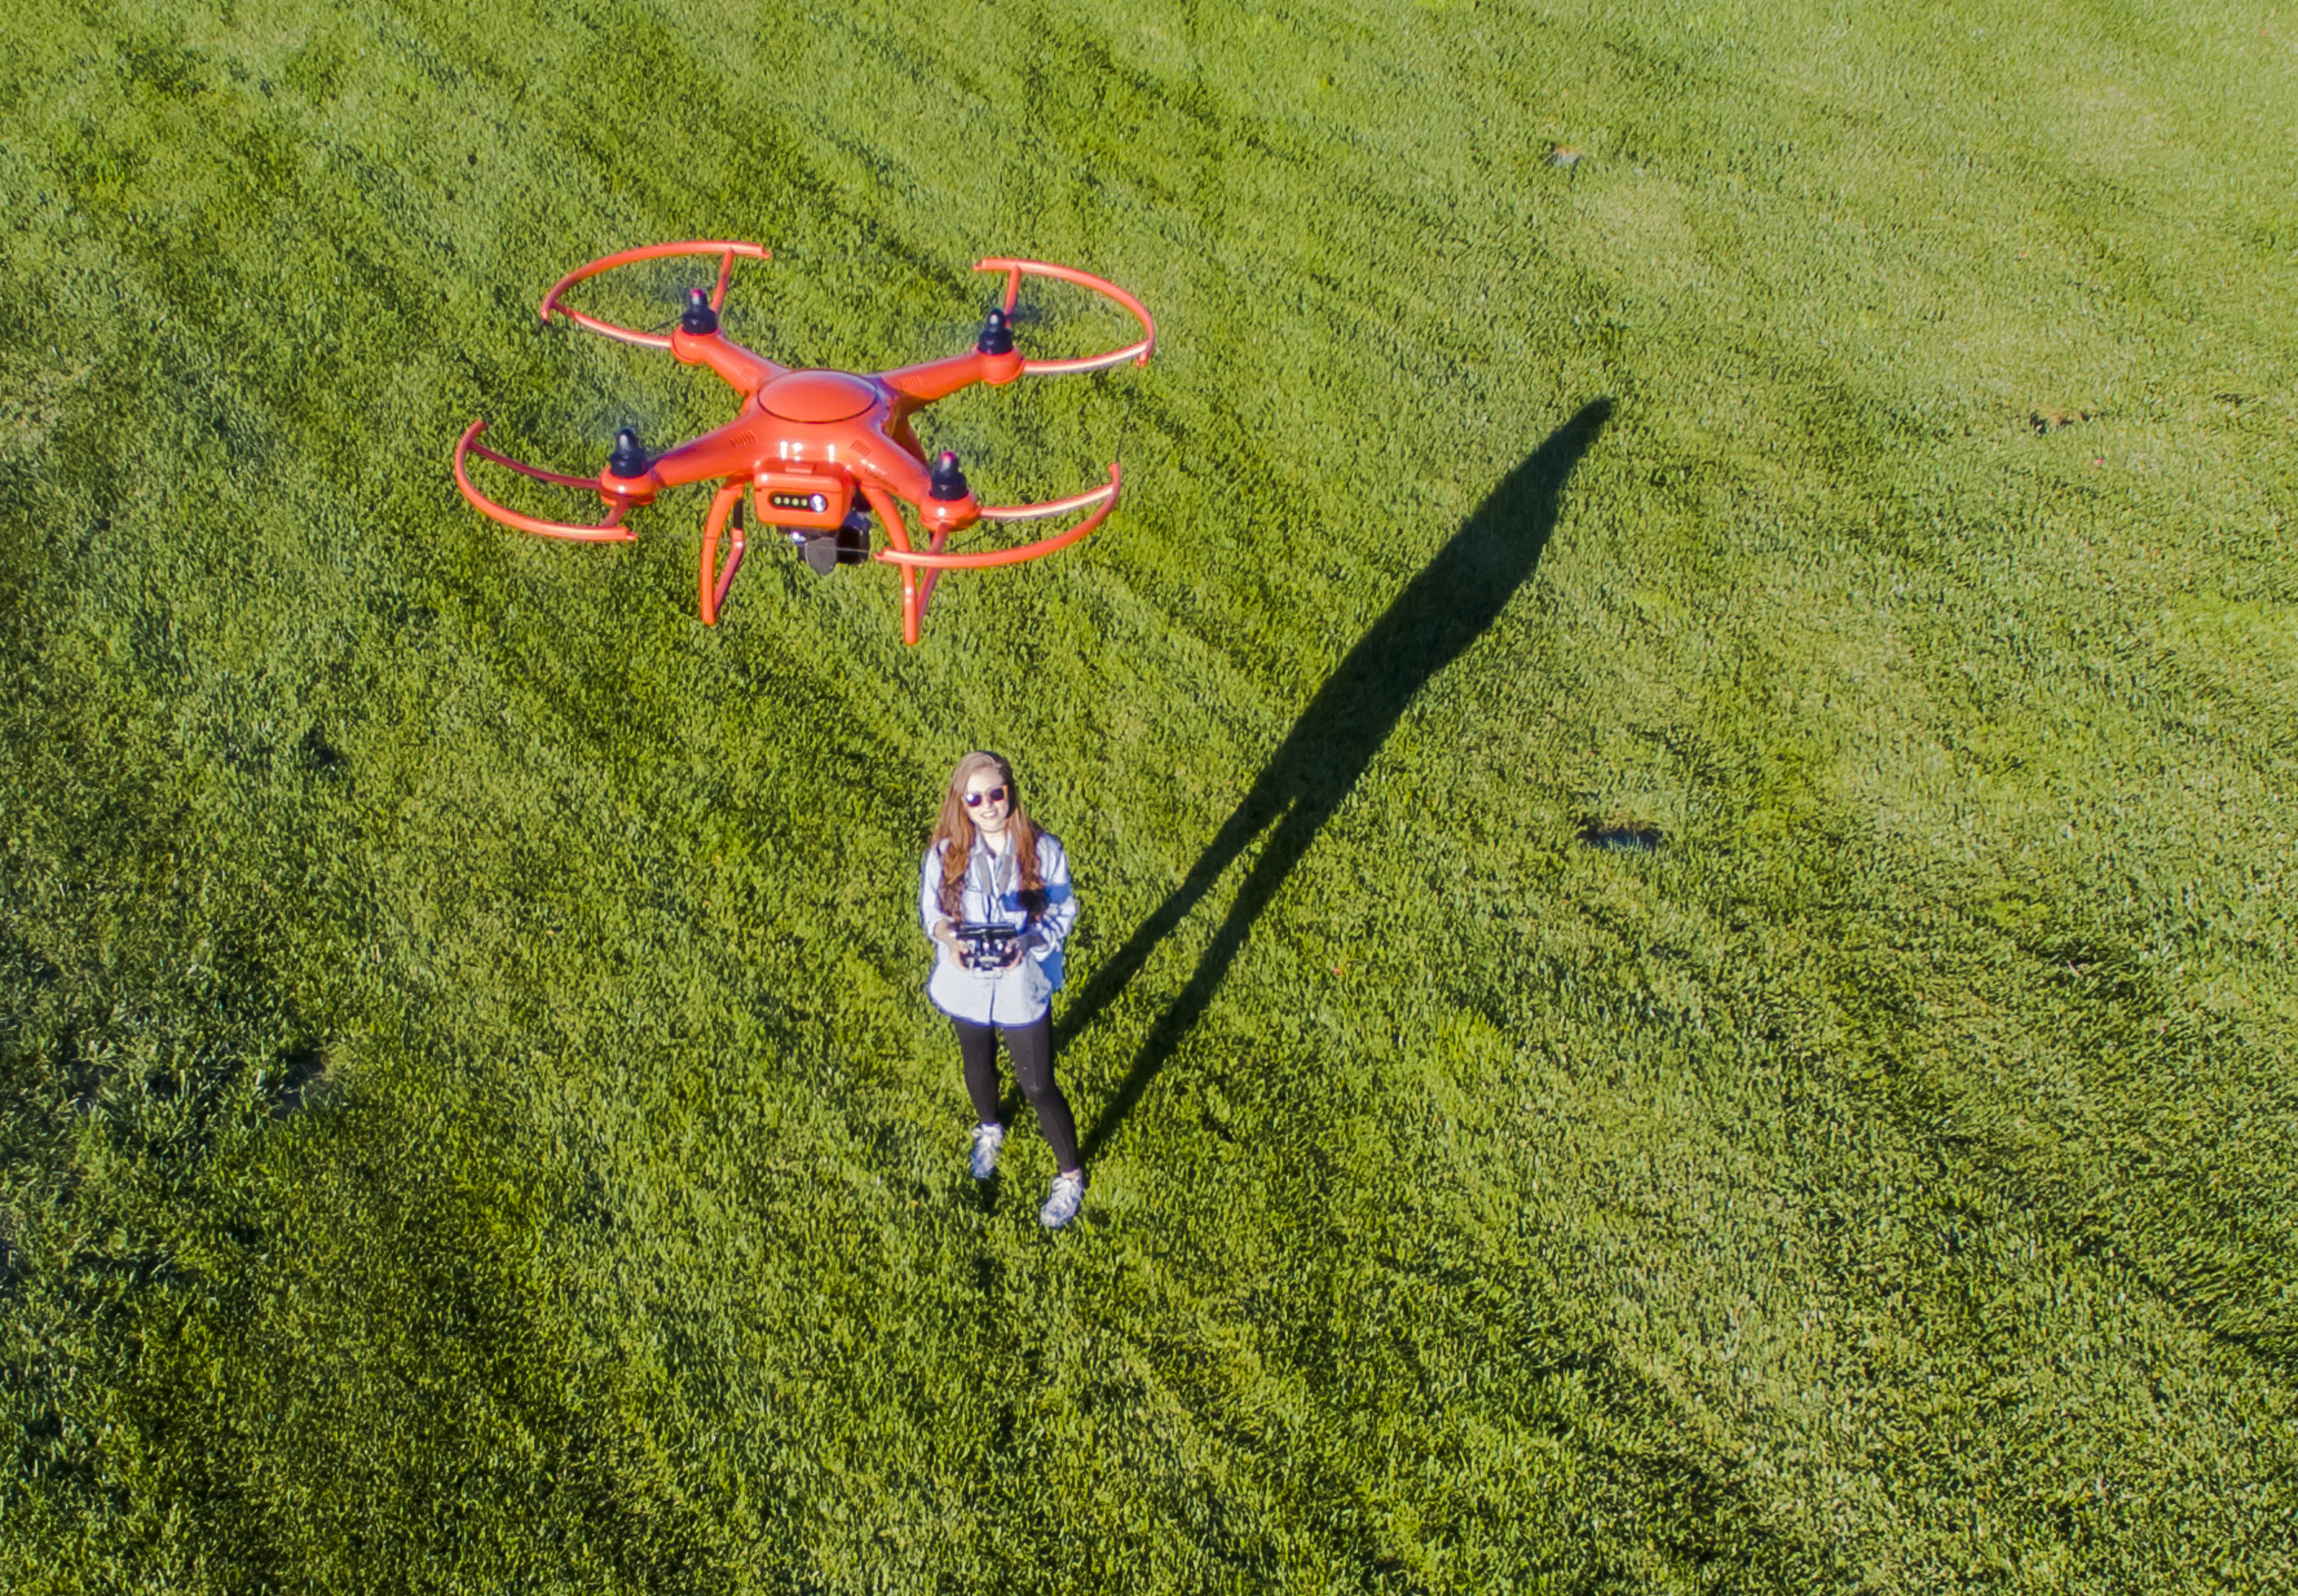 A brunette coed flying a drone in the outdoors